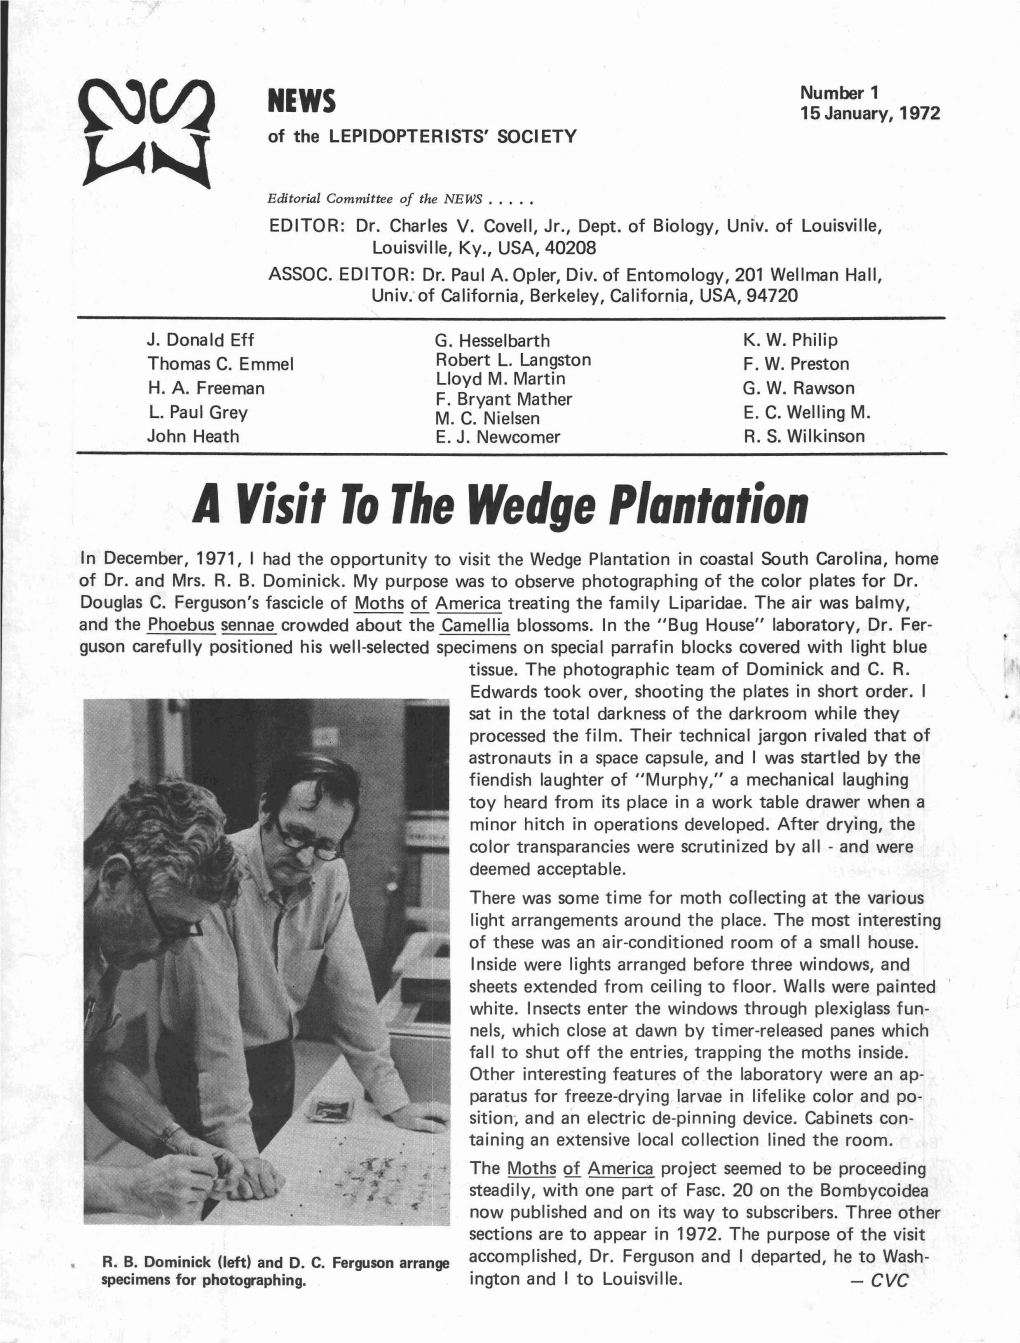 S;T to the Wedge P/Ontot;On in December, 1971, I Had the Opportunity to Visit the Wedge Plantation in Coastal South Carolina, Home of Dr